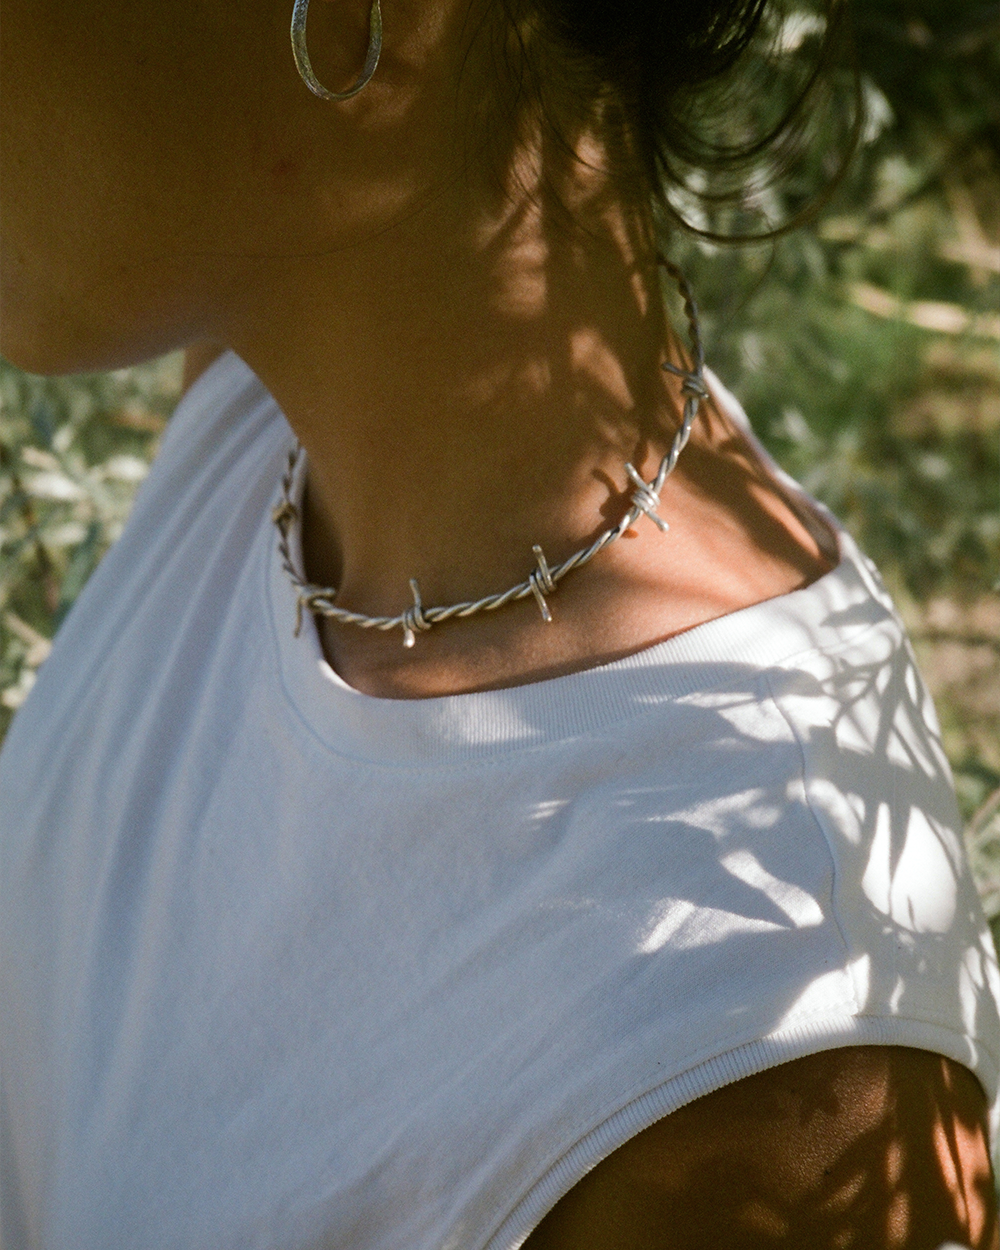 Barbed Wire Choker www.melodyehsani.com | Chokers, Wire necklace, Necklace